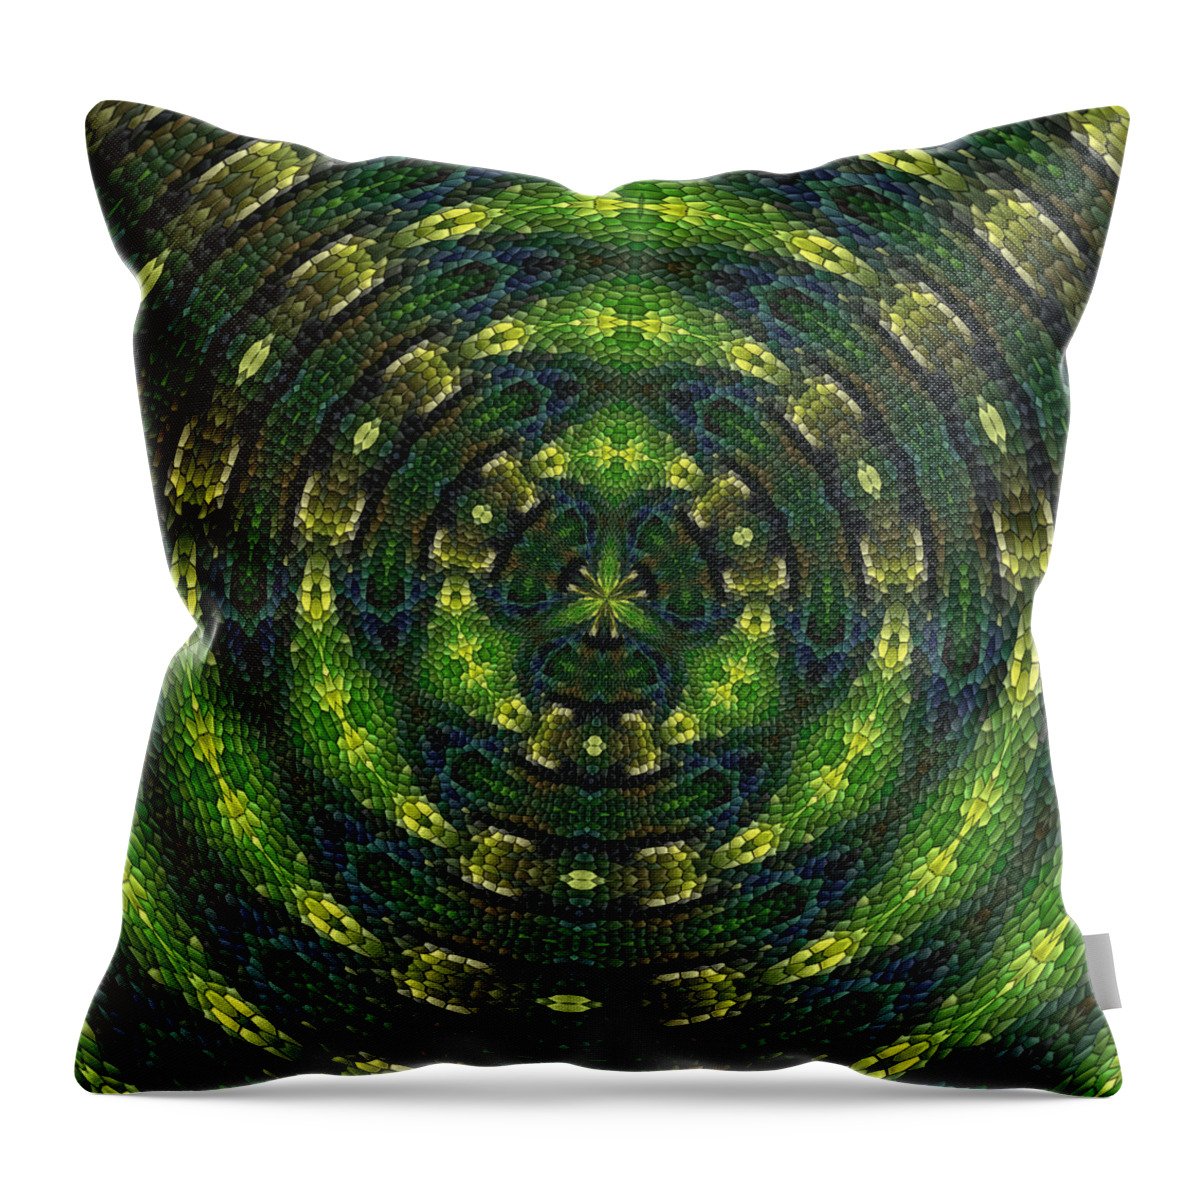 Green Throw Pillow featuring the digital art Pond Perfect by Alec Drake